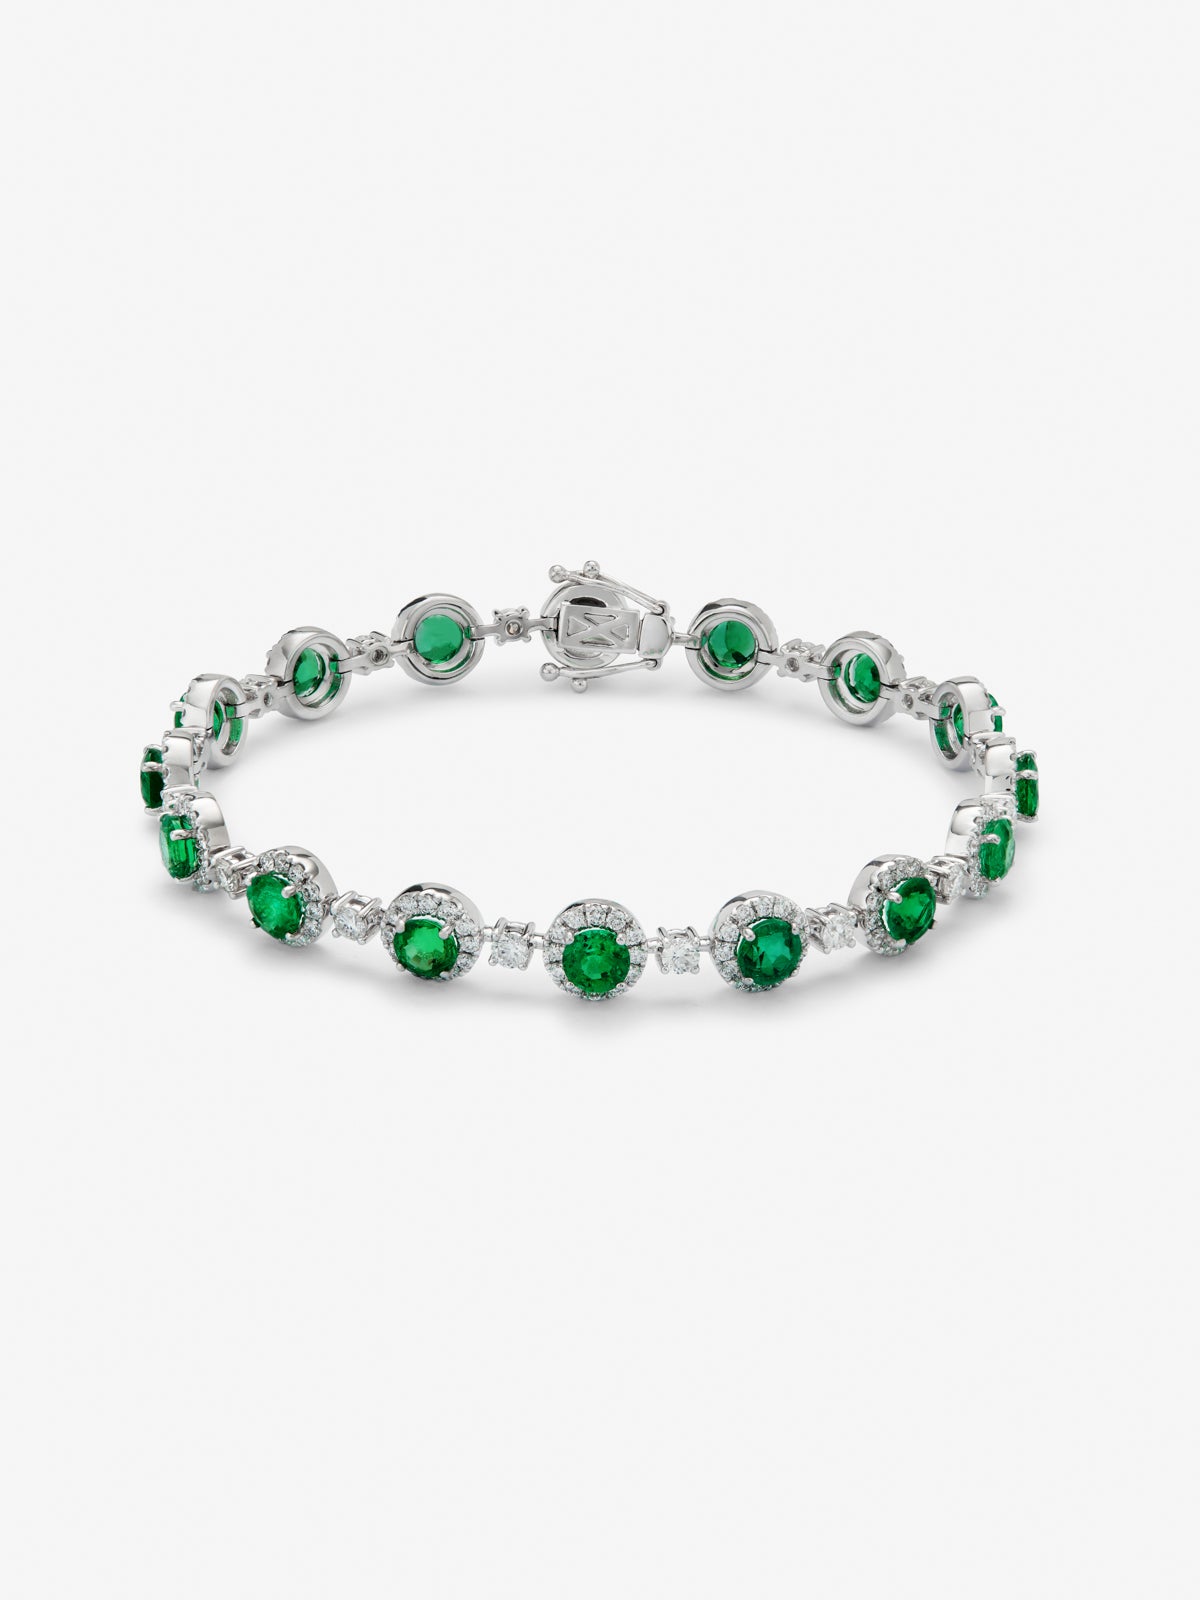 18K white gold bracelet with 16 brilliant-cut emeralds with a total of 5.58 cts and 208 brilliant-cut diamonds with a total of 2.73 cts